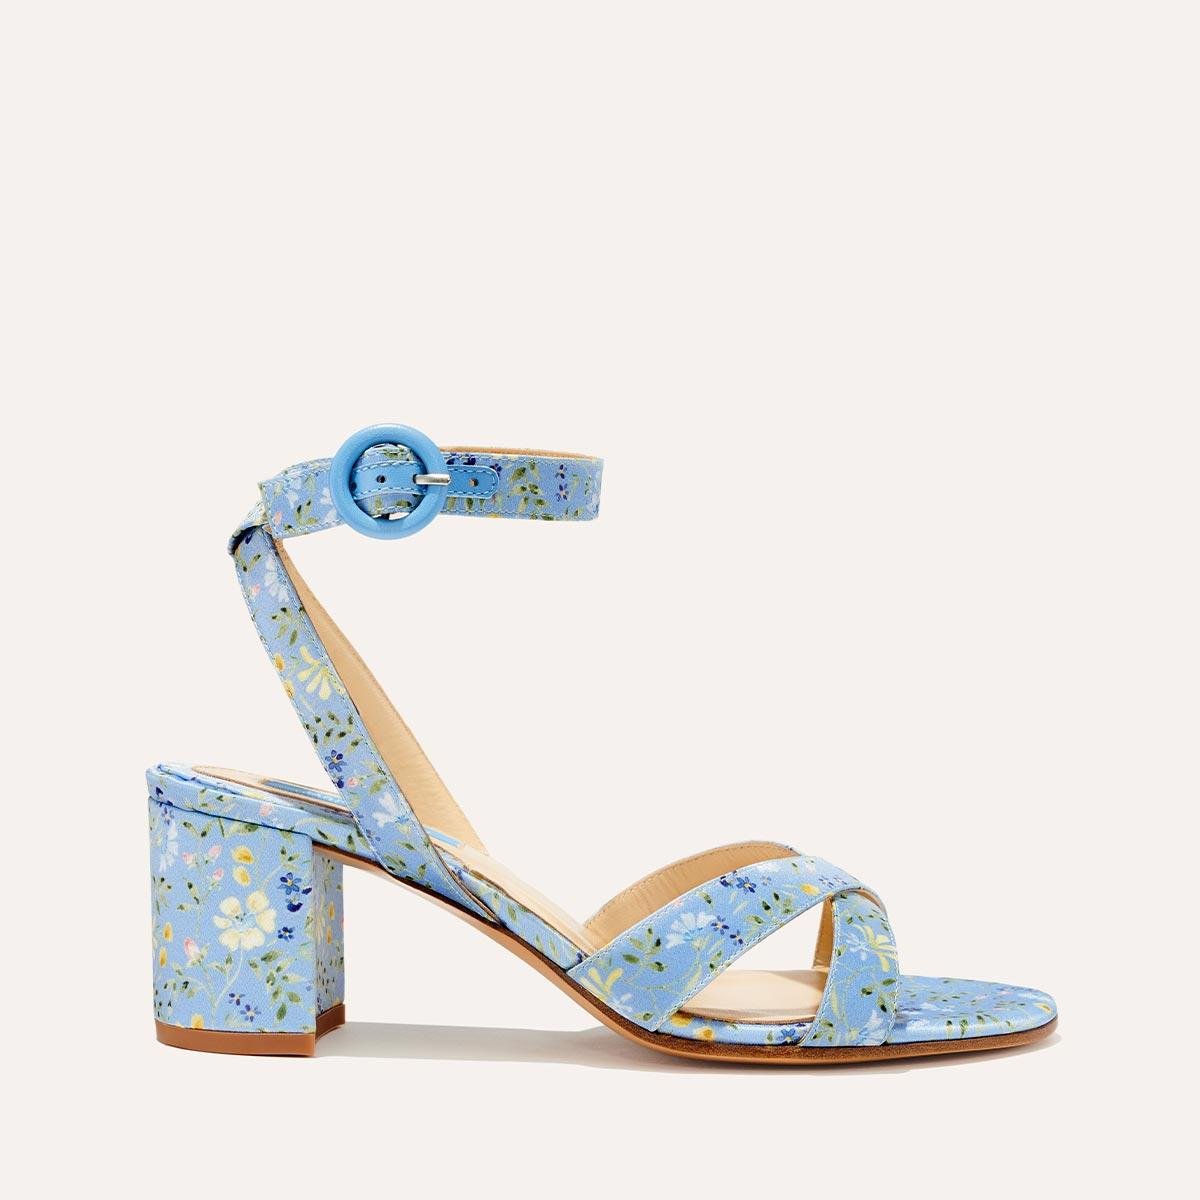 The City Sandal - Blue Floral Satin by MARGAUX